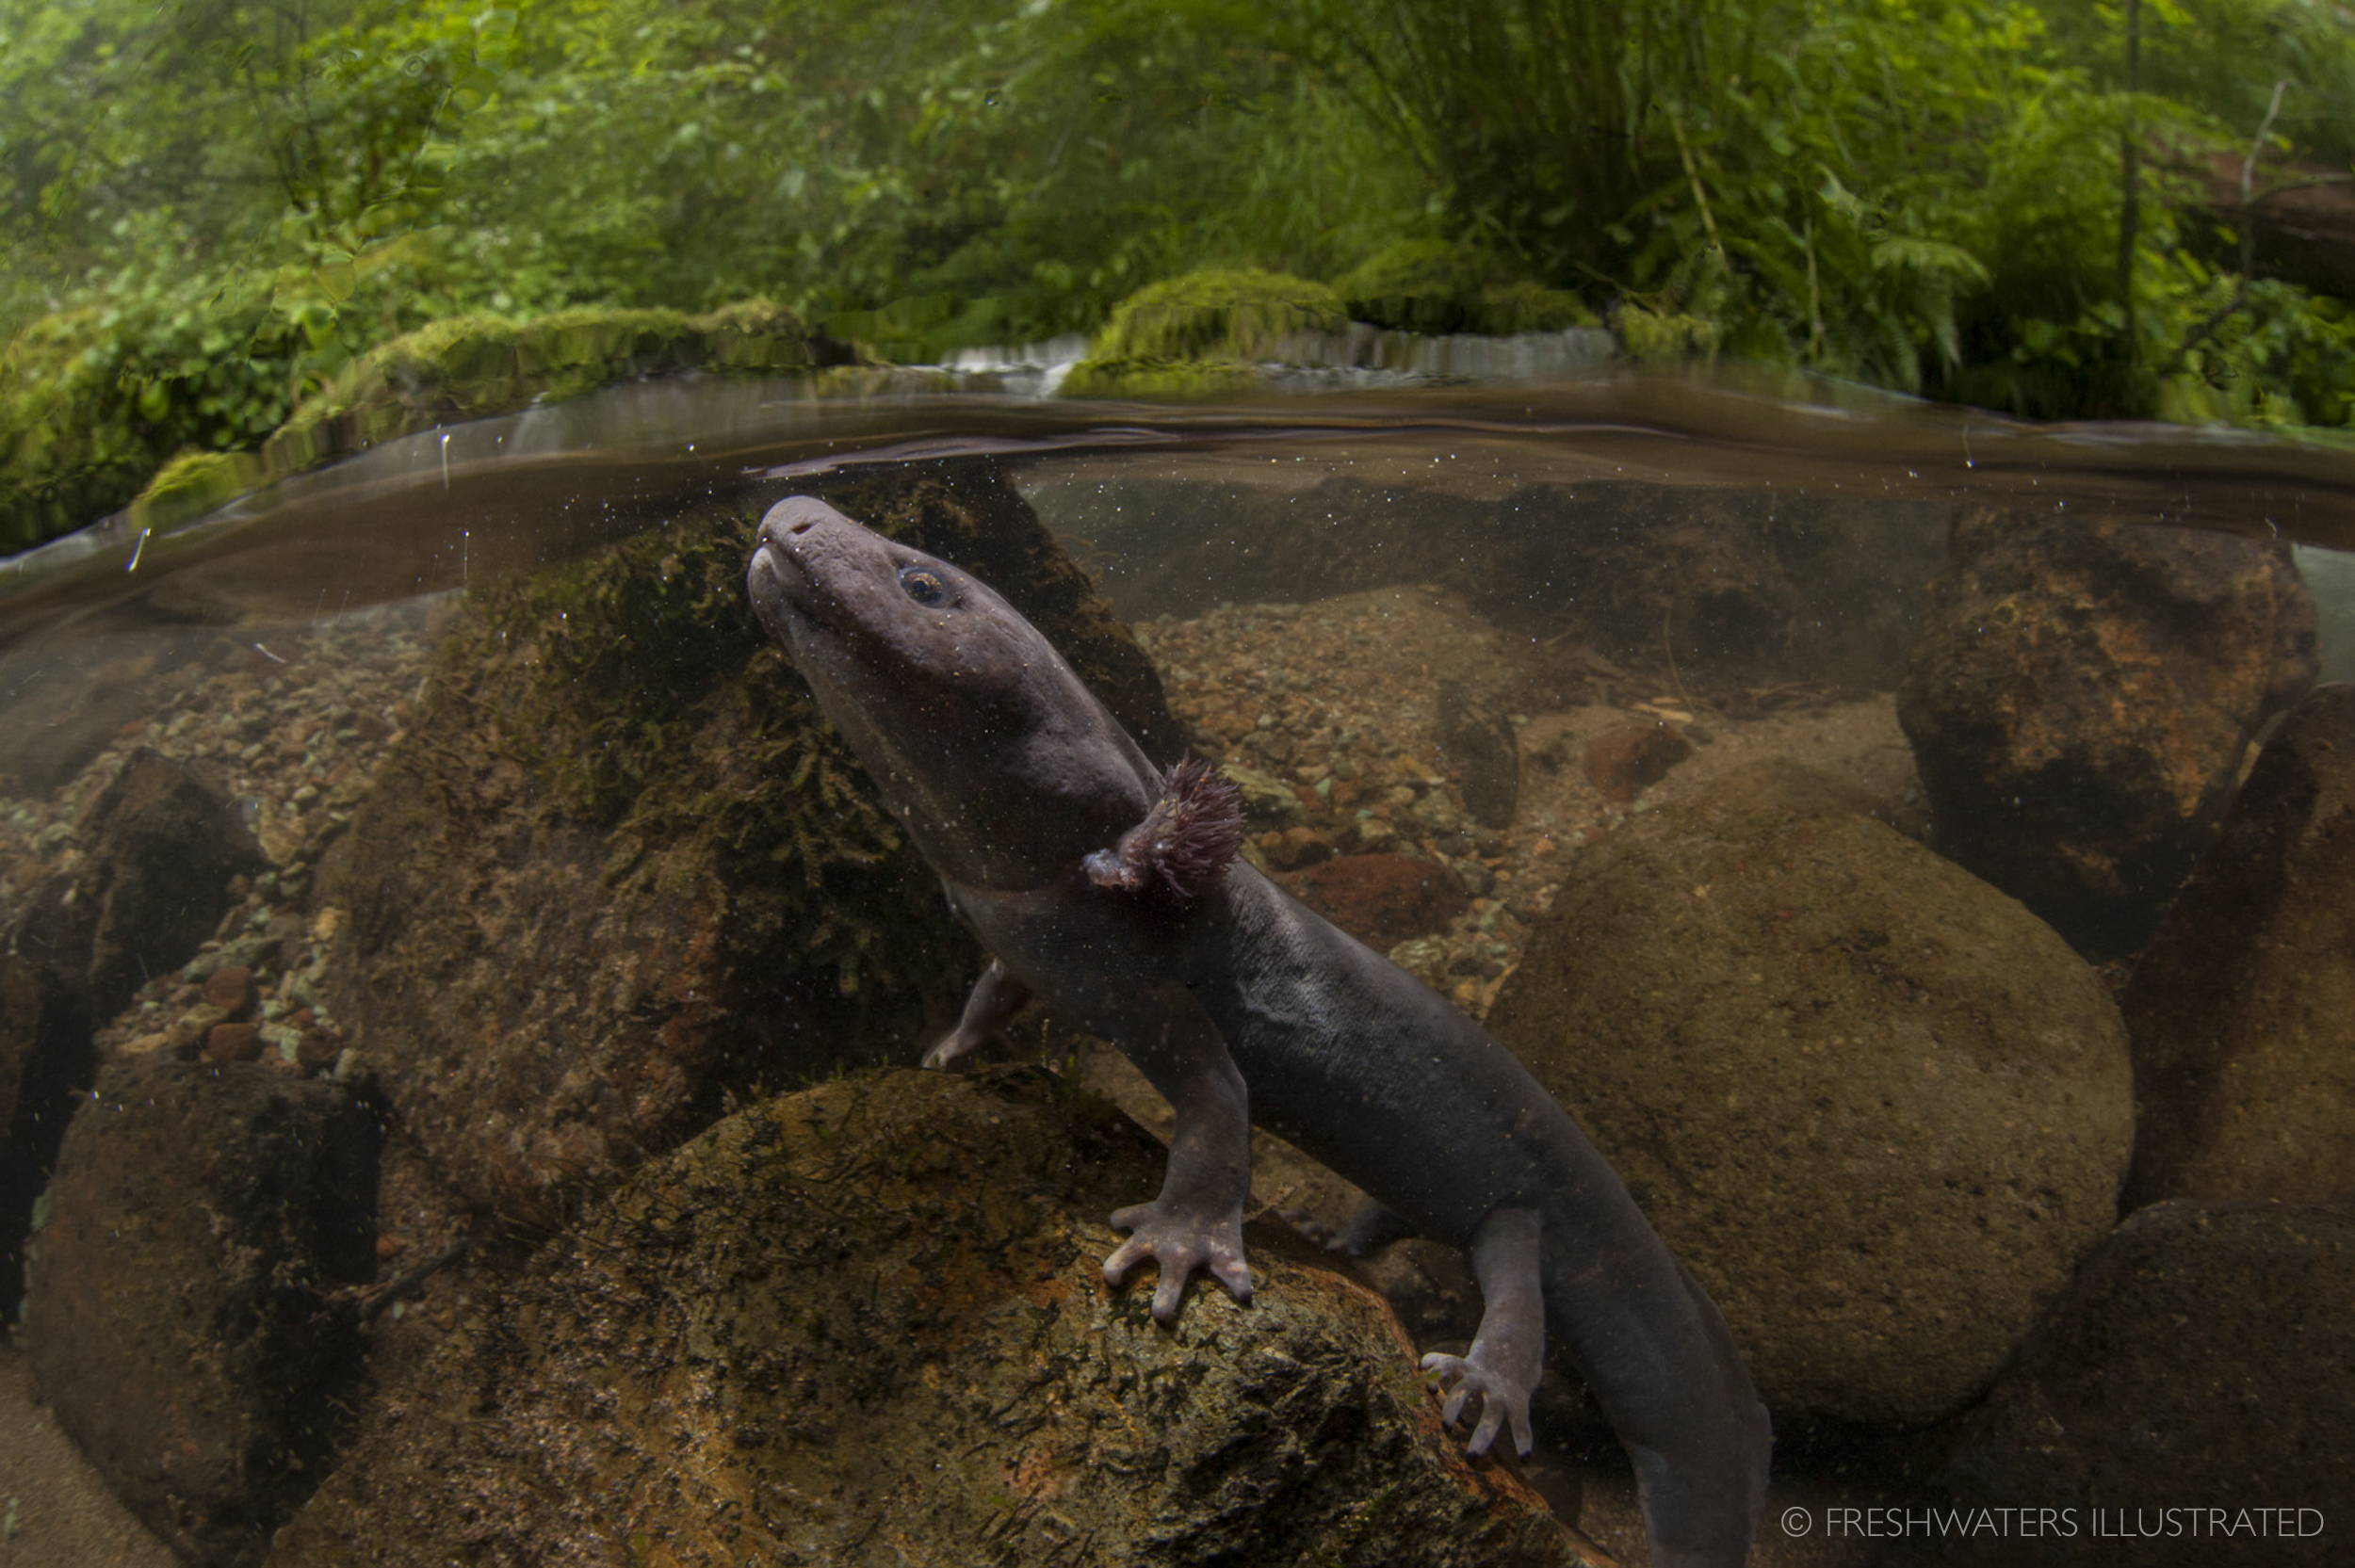  A Paedomorphic Pacific giant salamander (Dicamptodon tenebrosus) perches on a streambed stone in a Cascade stream in the Willamette National Forest. Moose creek, Oregon  www.FreshwatersIllustrated.org  